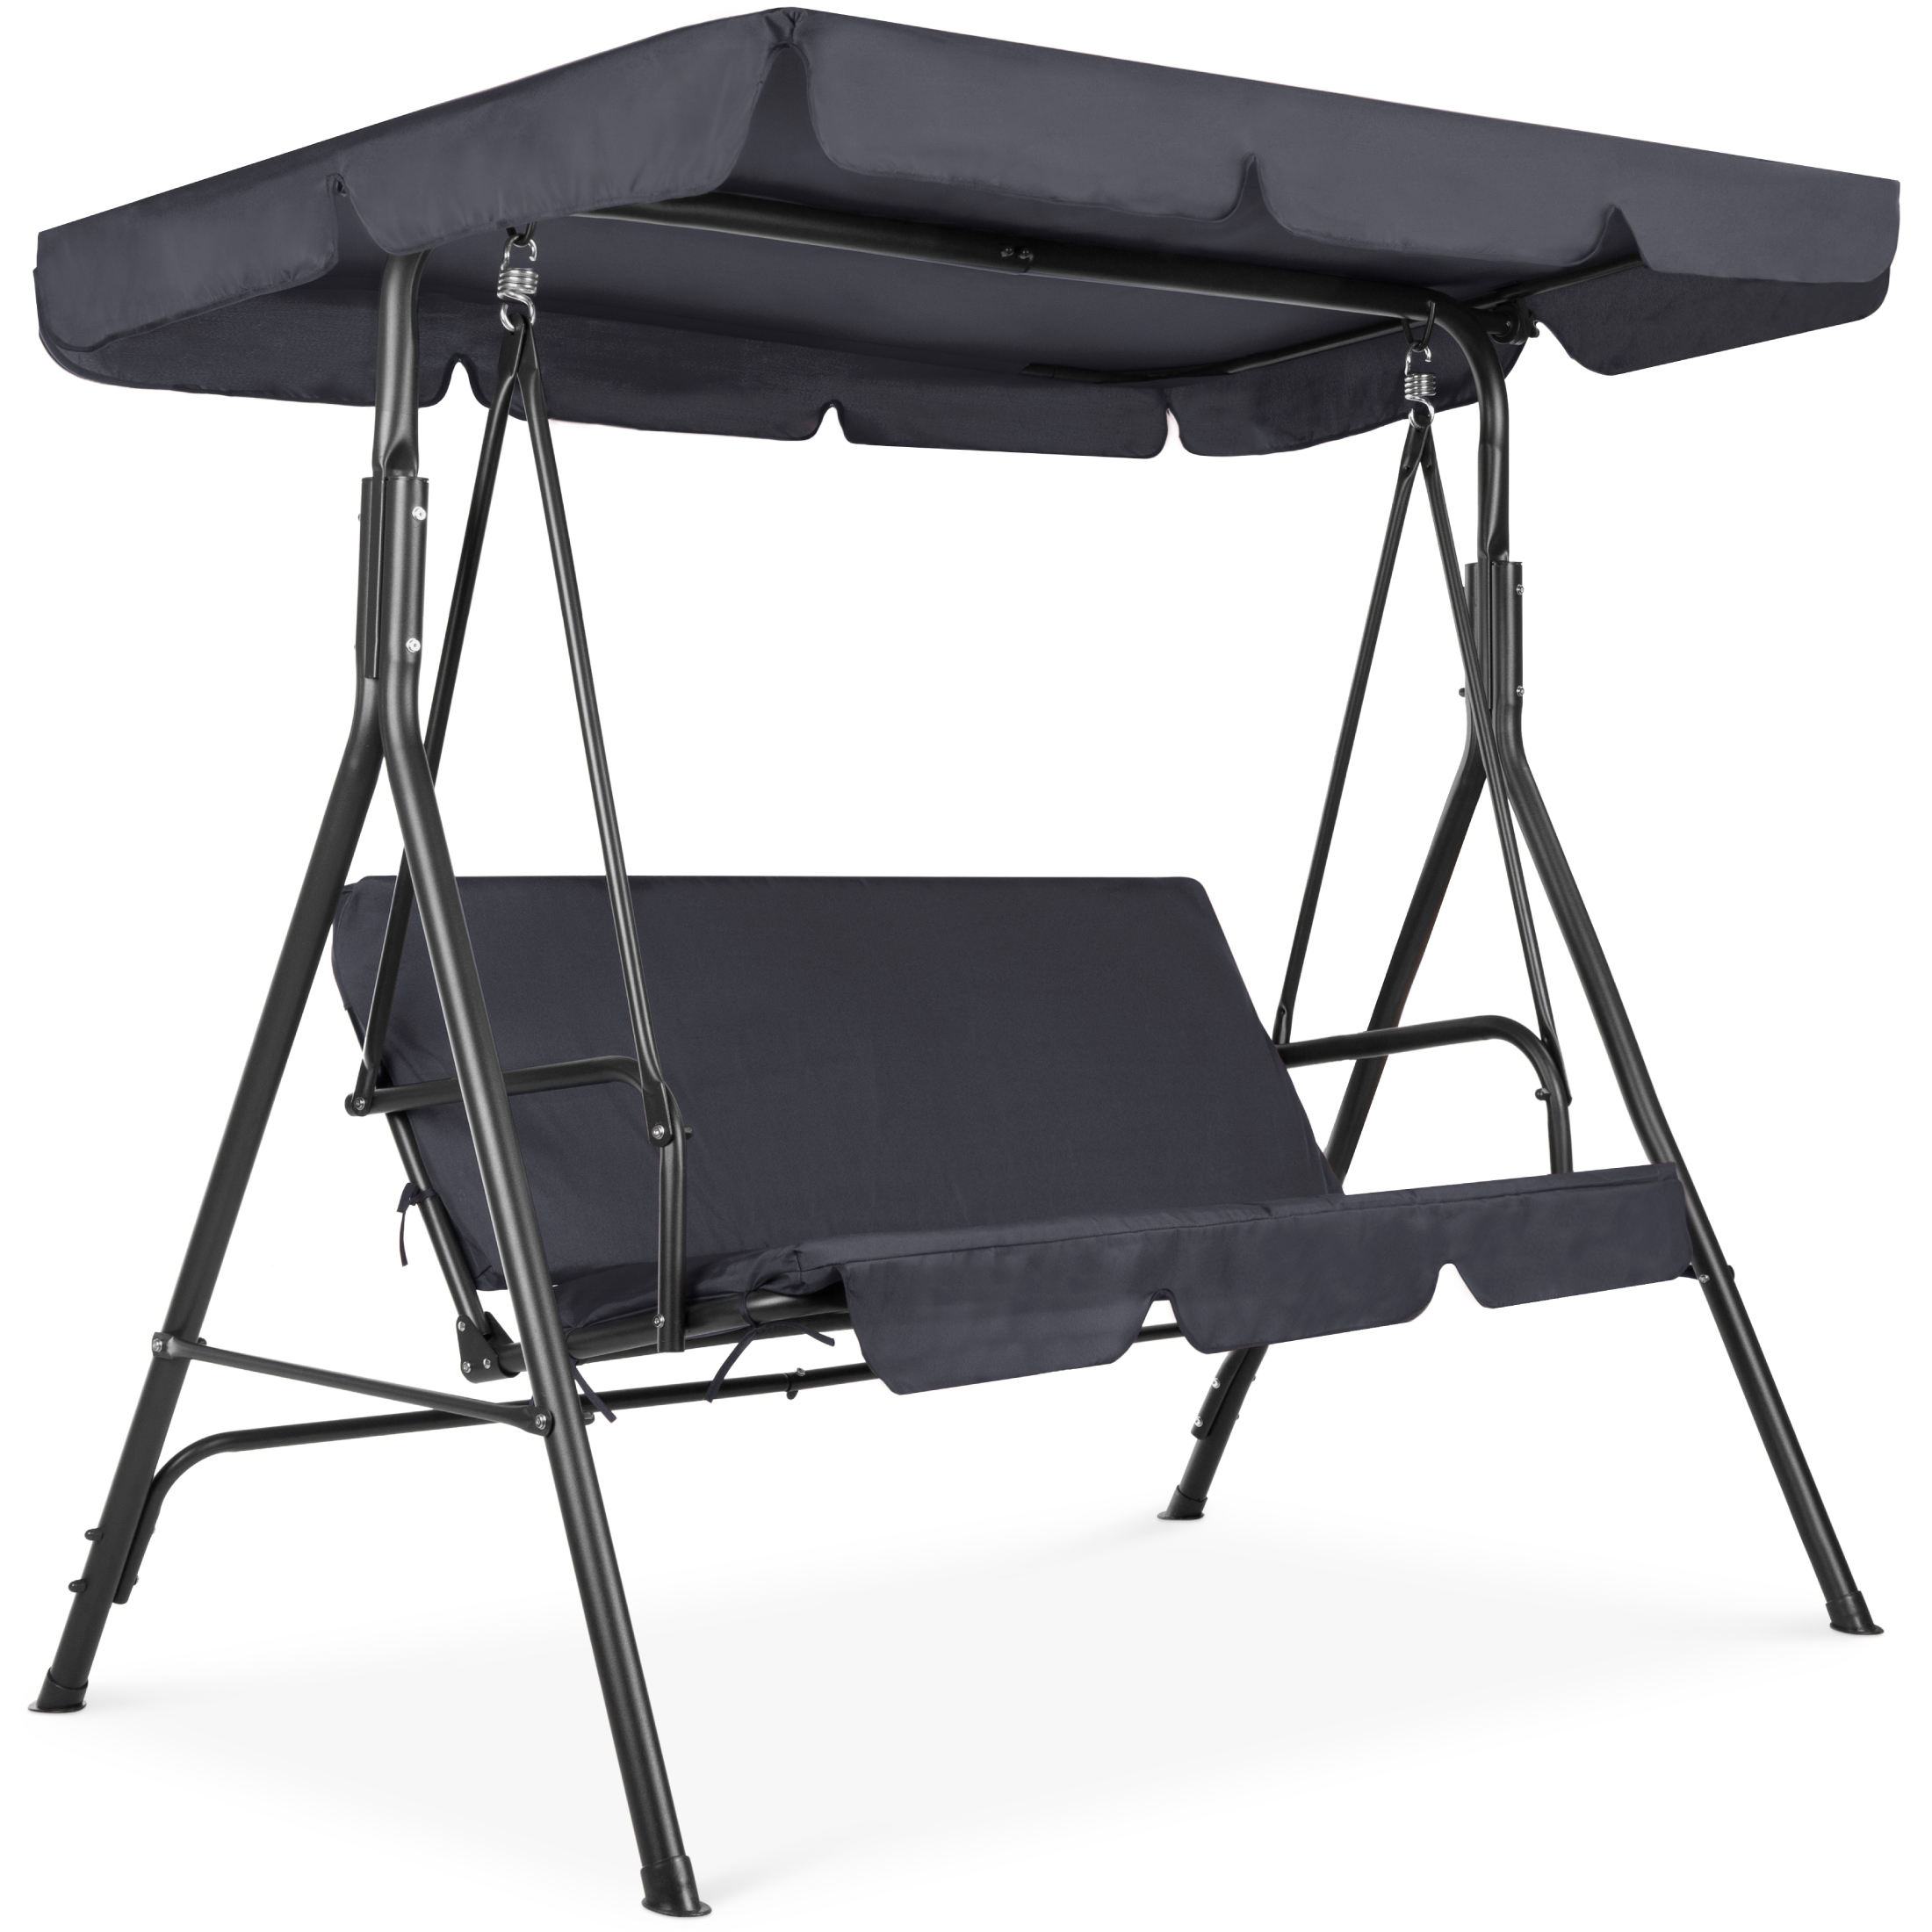 Best Choice Products 2-Person Outdoor Large Convertible Canopy Swing Glider Lounge Chair w/ Removable Cushions - Gray - image 1 of 7